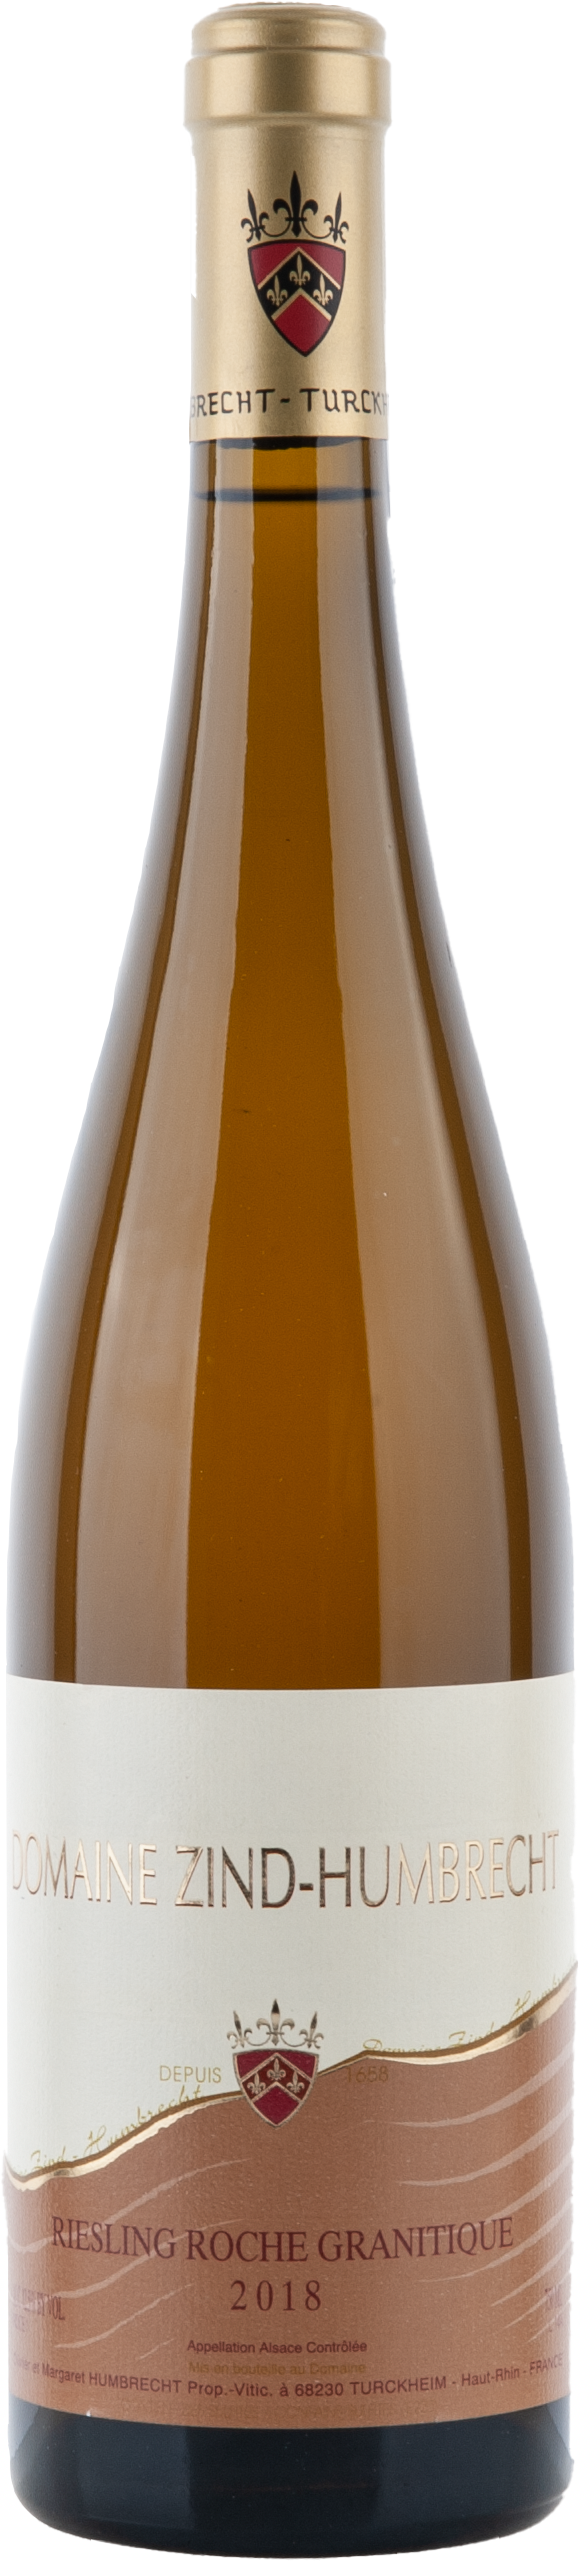 Riesling Roche Granitique